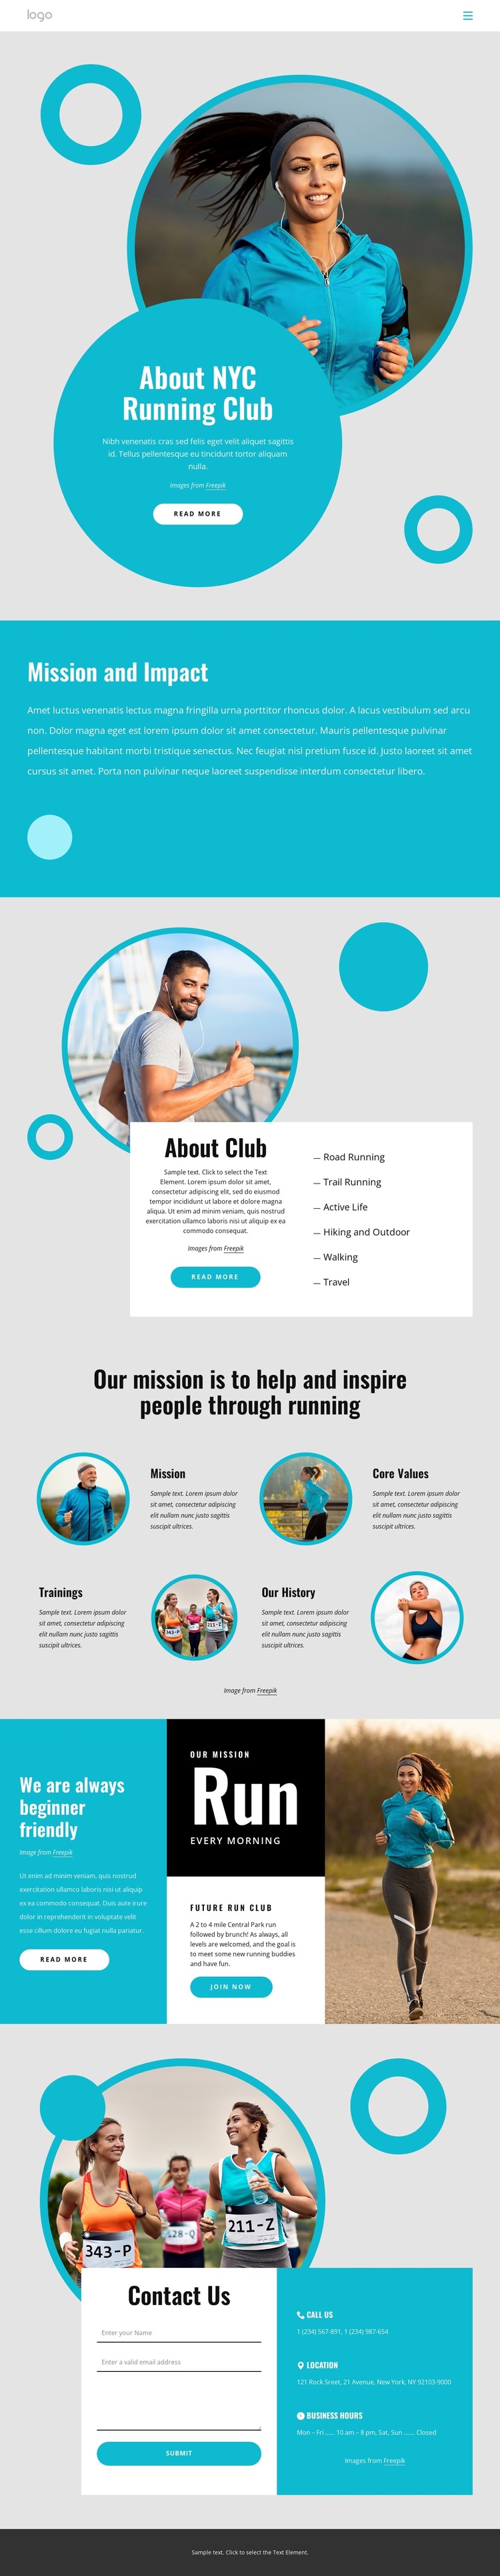 About NYC running club Joomla Page Builder